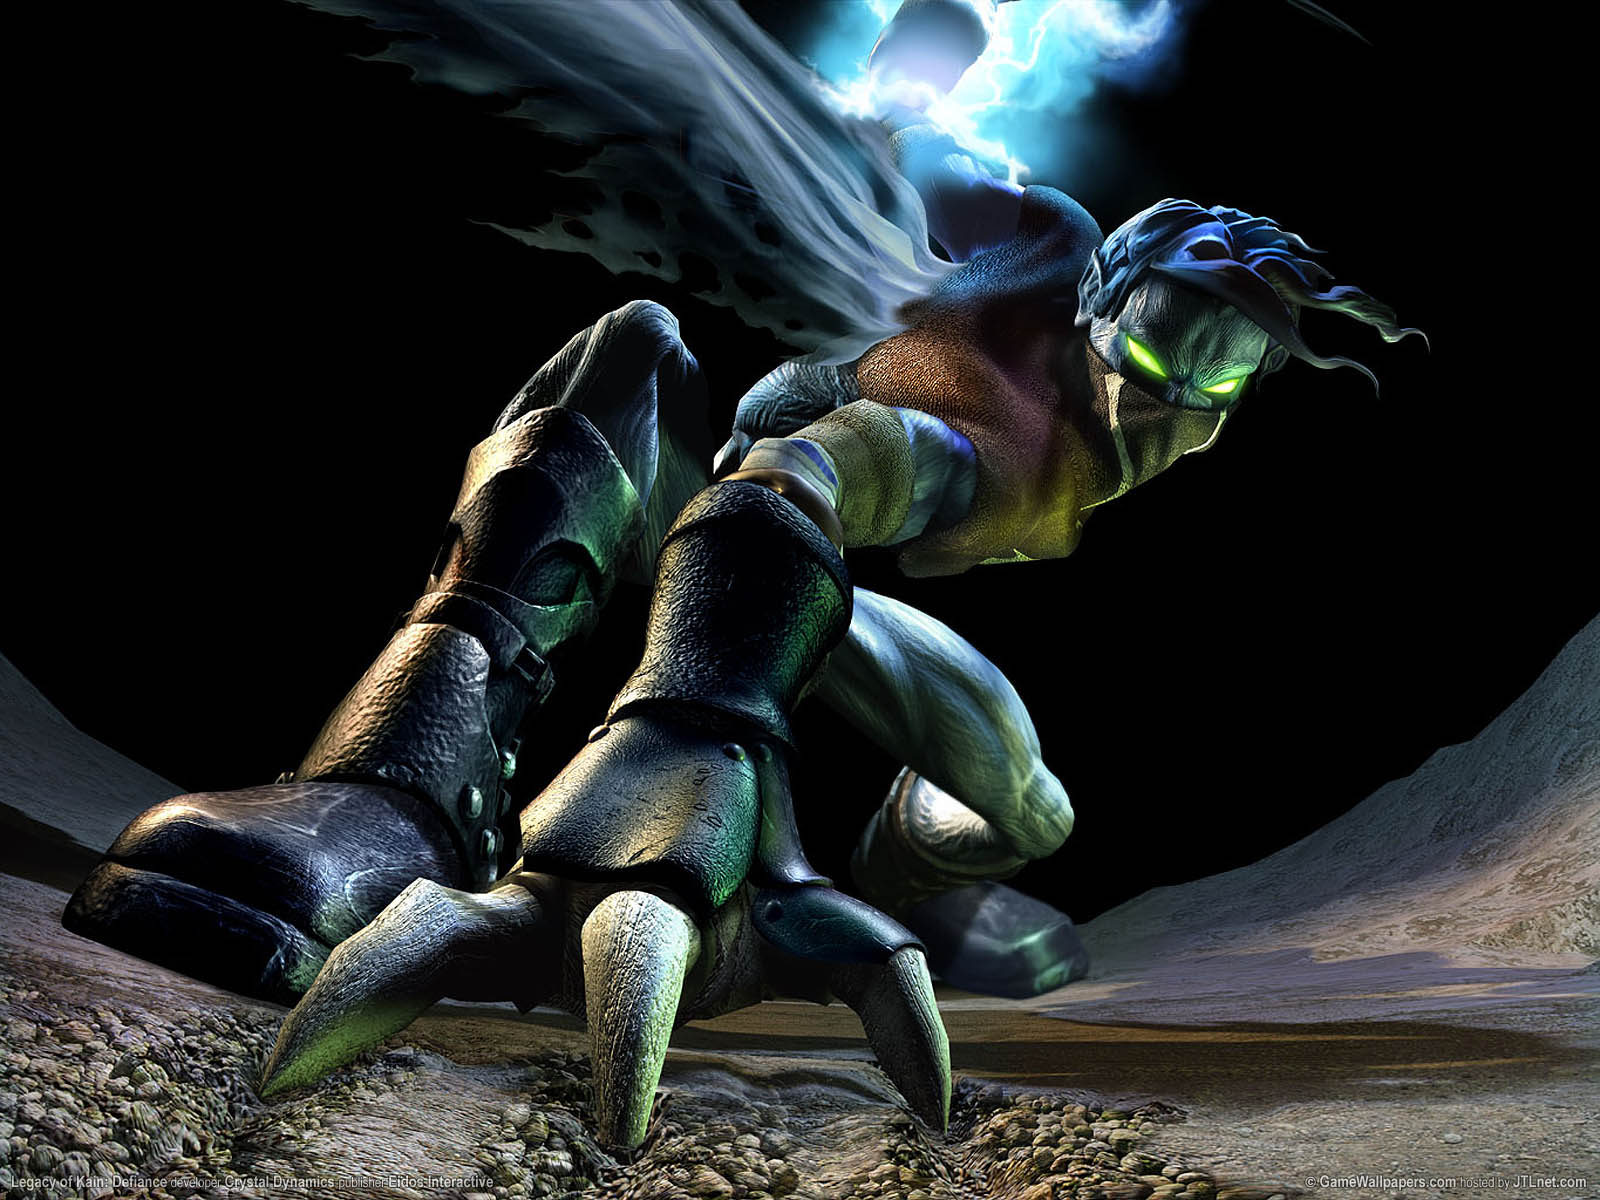 Legacy of Kain%25253A Defiance achtergrond 03 1600x1200